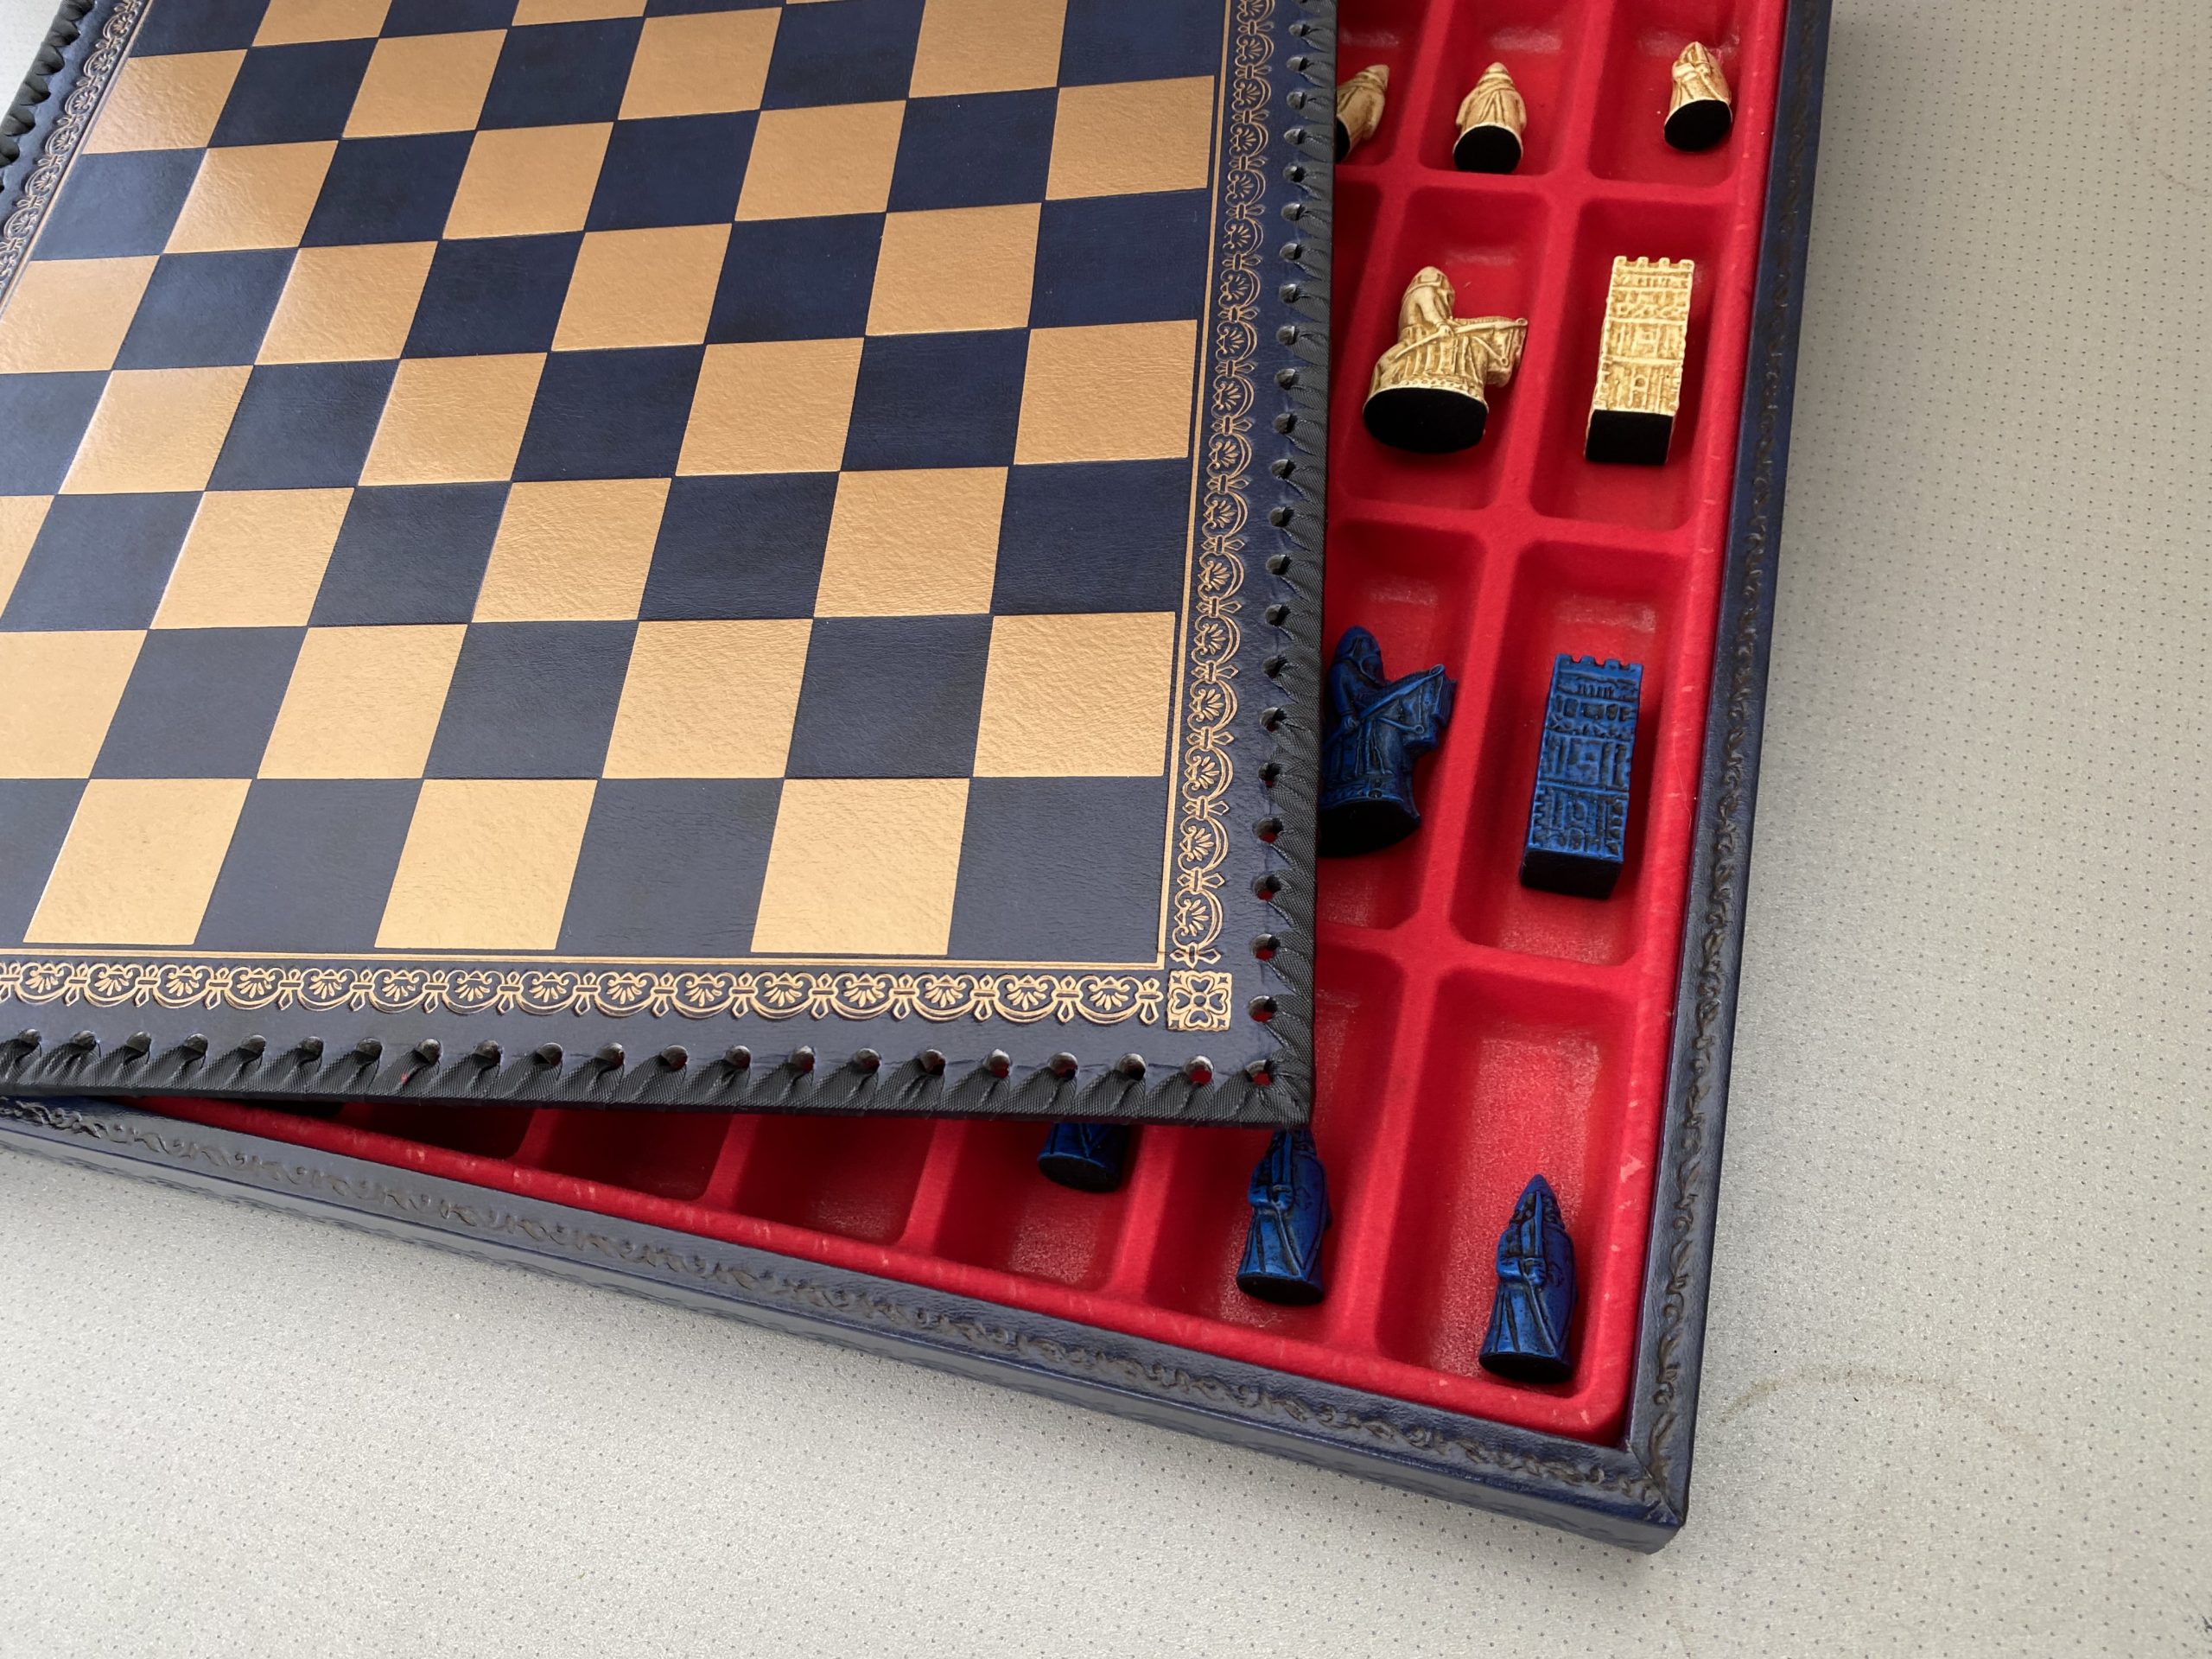 Leather Lunch Box Black Buenos New Chess -  Portugal